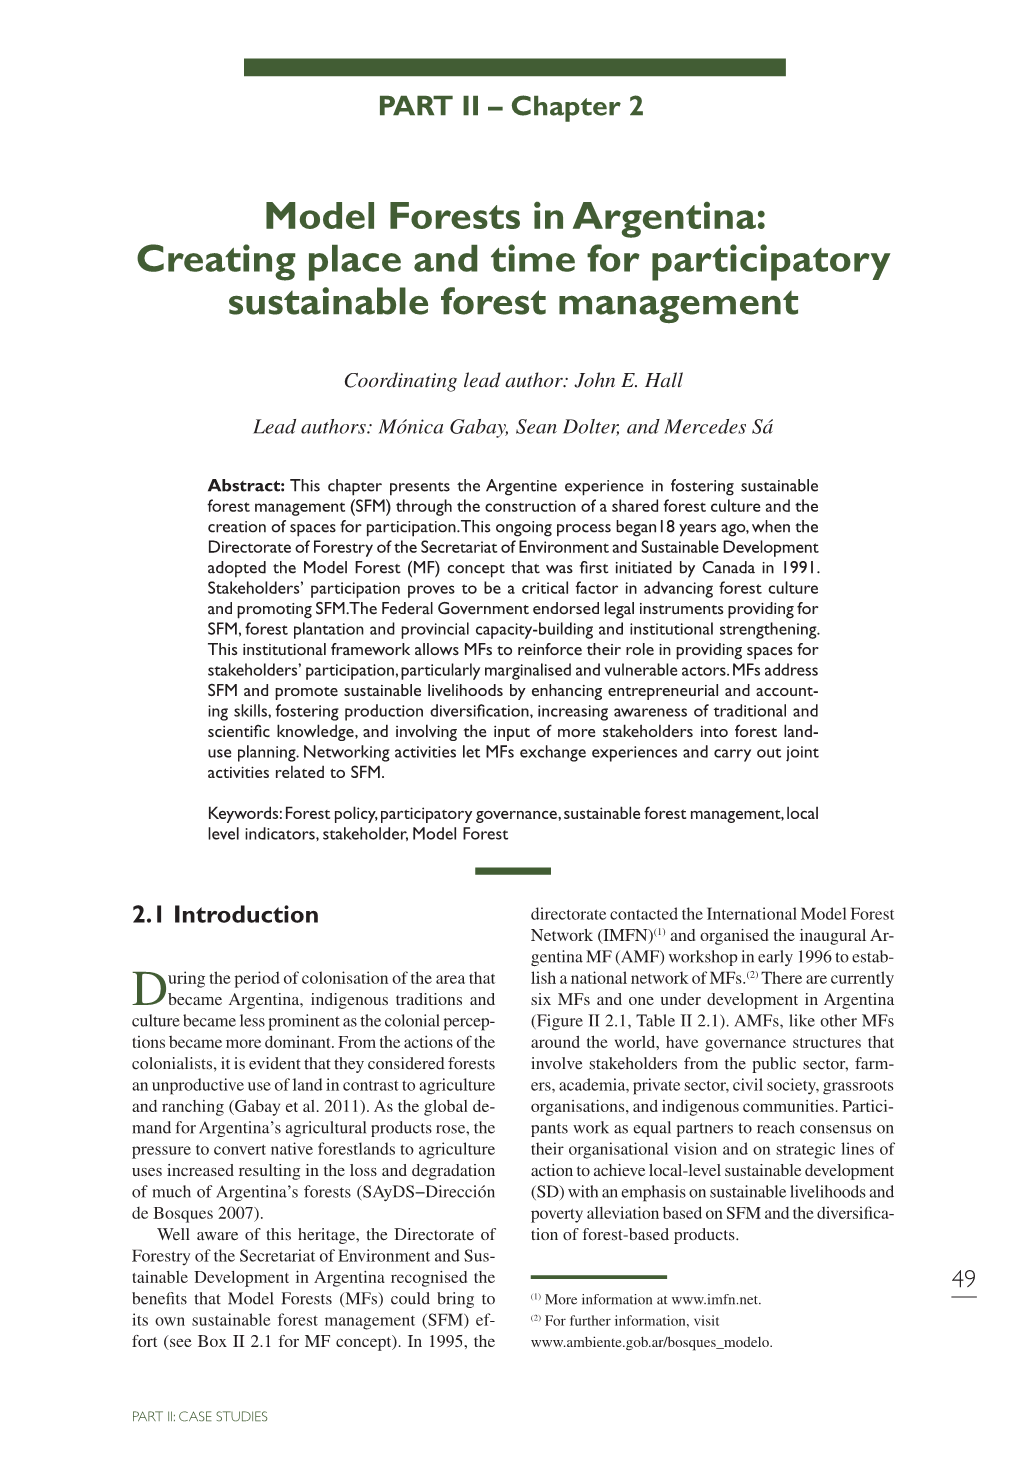 Model Forests in Argentina: Creating Place and Time for Participatory Sustainable Forest Management